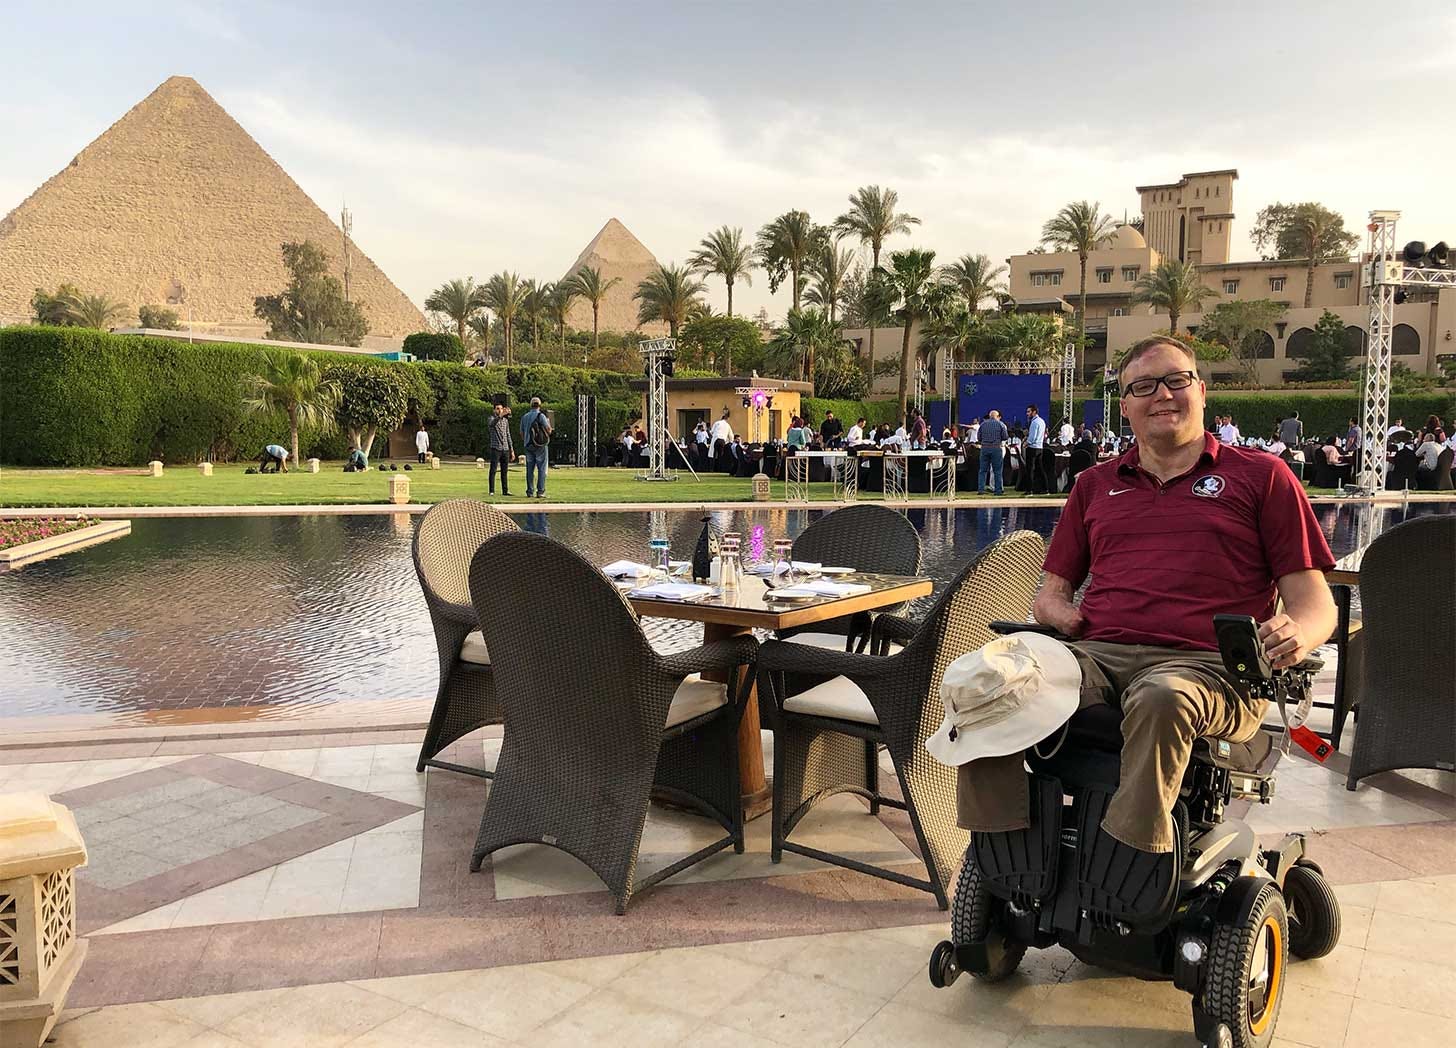 John seated in front of his power wheelchair in front of the Egyptian pyramids.